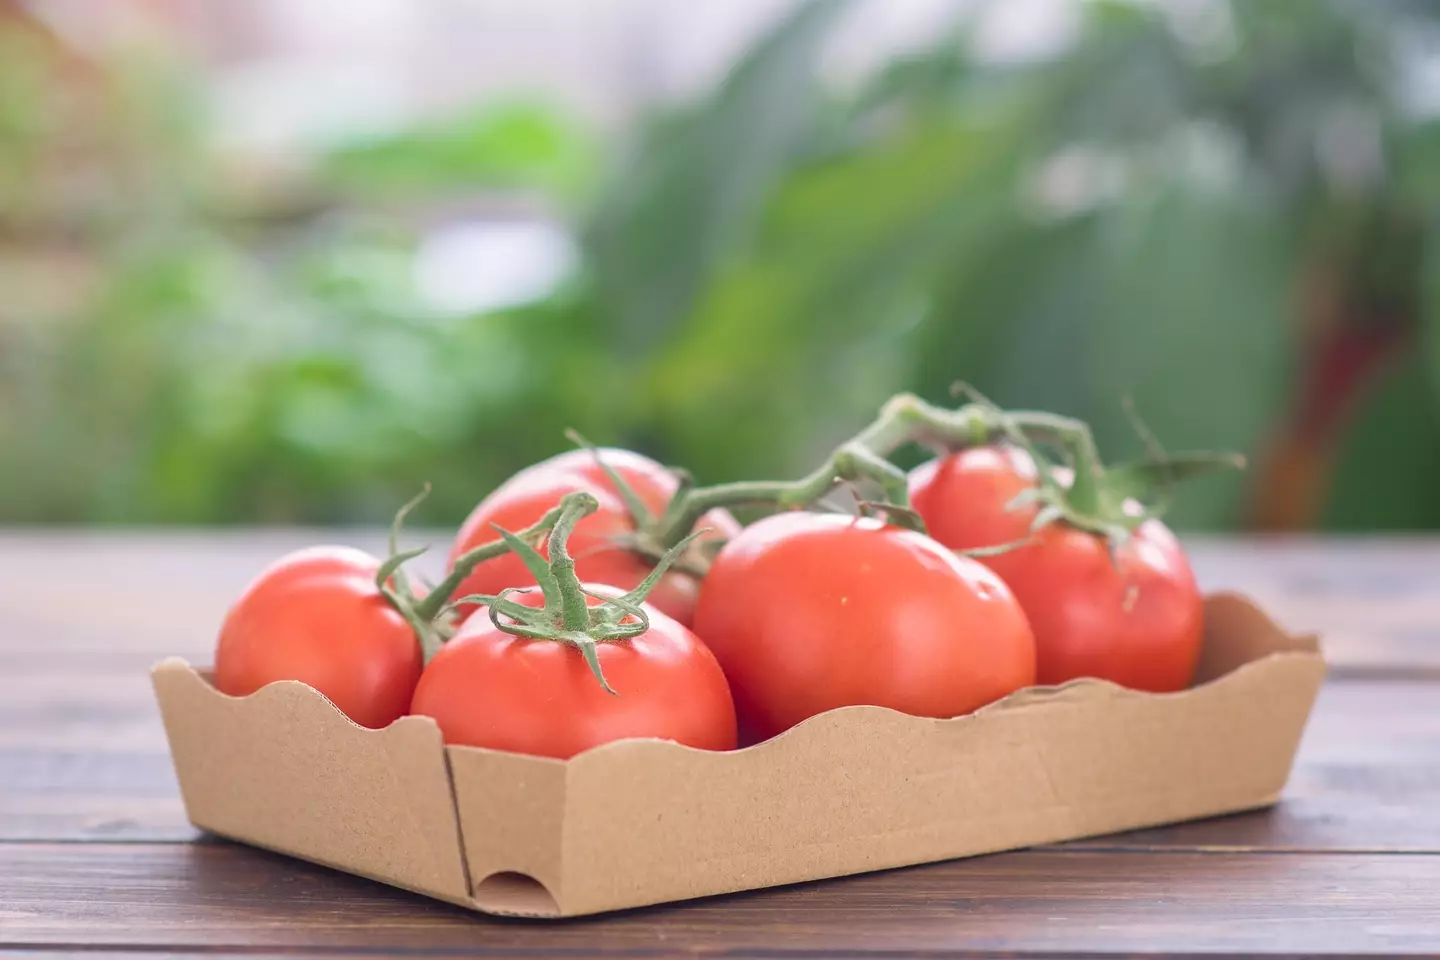 The price of a carton of tomatoes has reportedly risen by 400 percent.